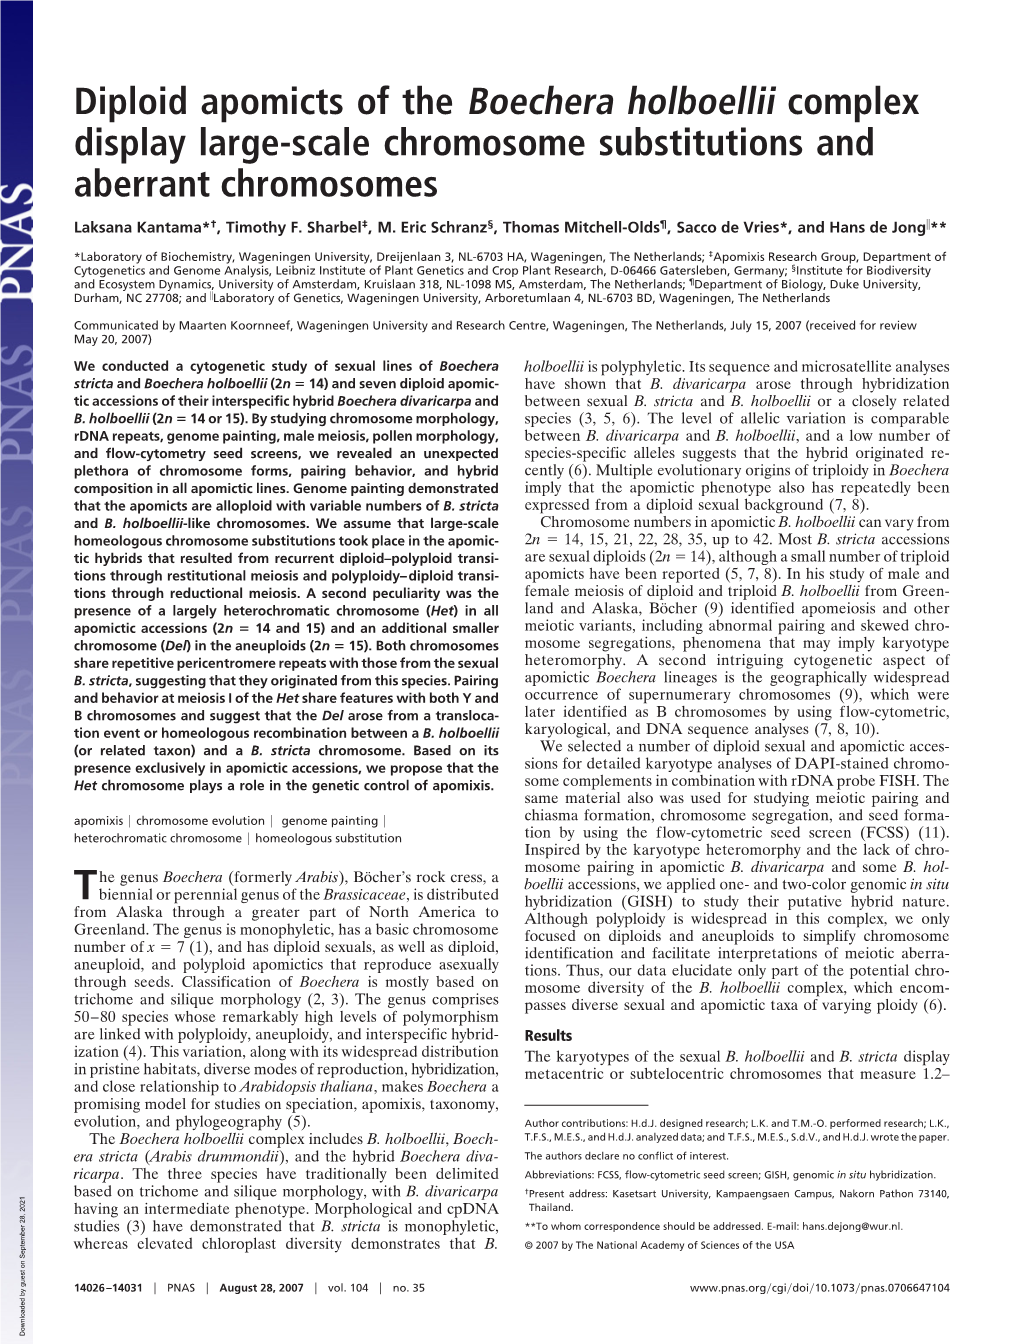 Diploid Apomicts of the Boechera Holboellii Complex Display Large-Scale Chromosome Substitutions and Aberrant Chromosomes